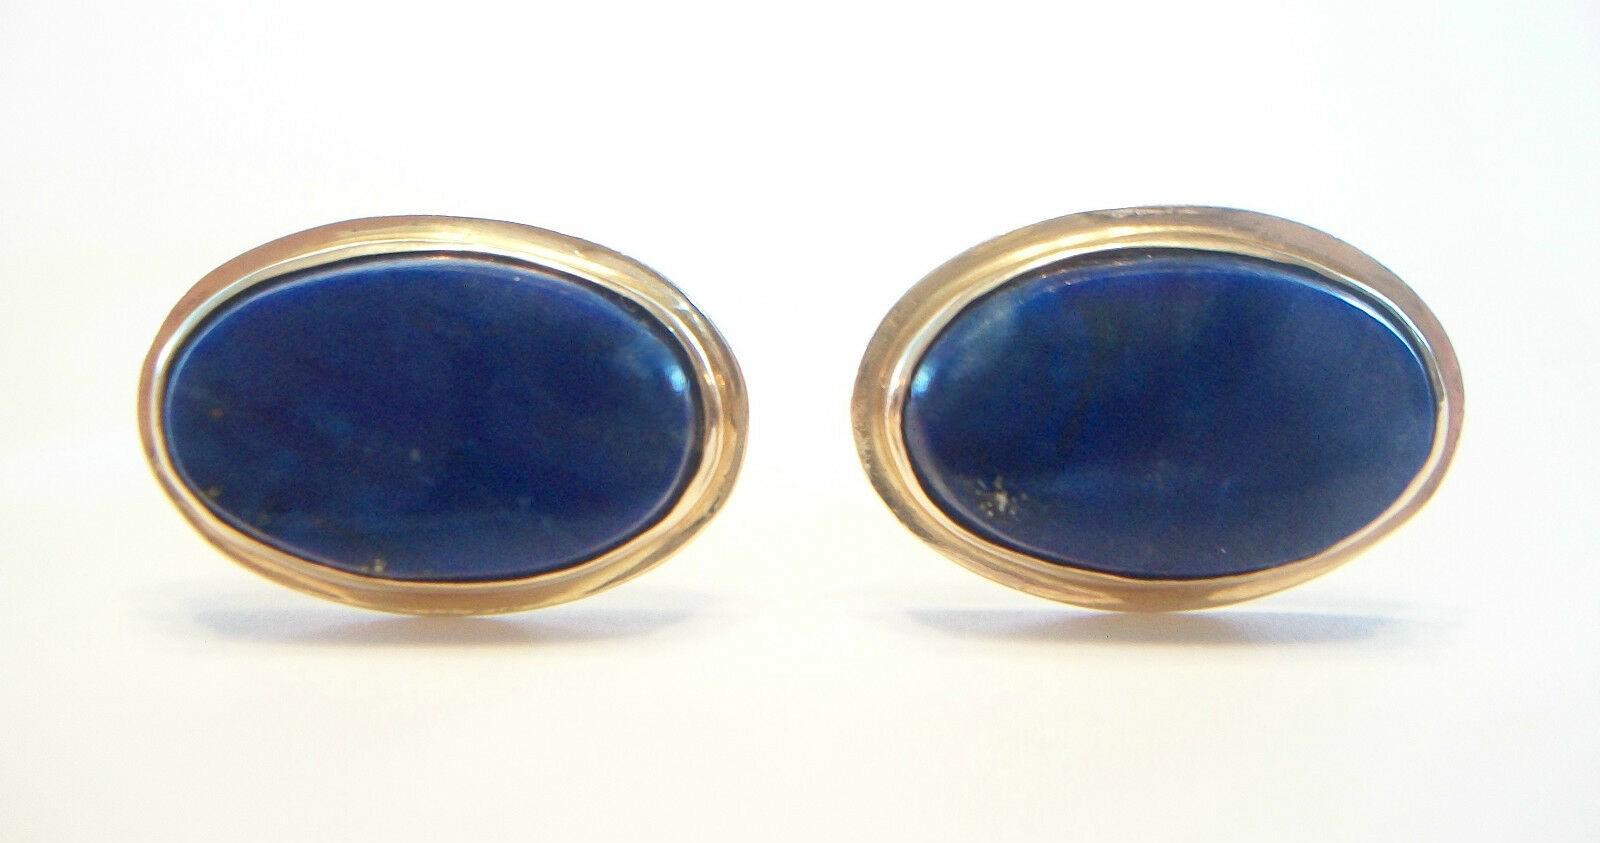 Vintage Lapis Lazuli & 14K yellow gold cufflinks - bezel set gemstones - bench made/hand made - unsigned - each toggle stamped 14K - late 20th century.

Excellent vintage condition - all original - no loss - no damage - no repairs - fine surface